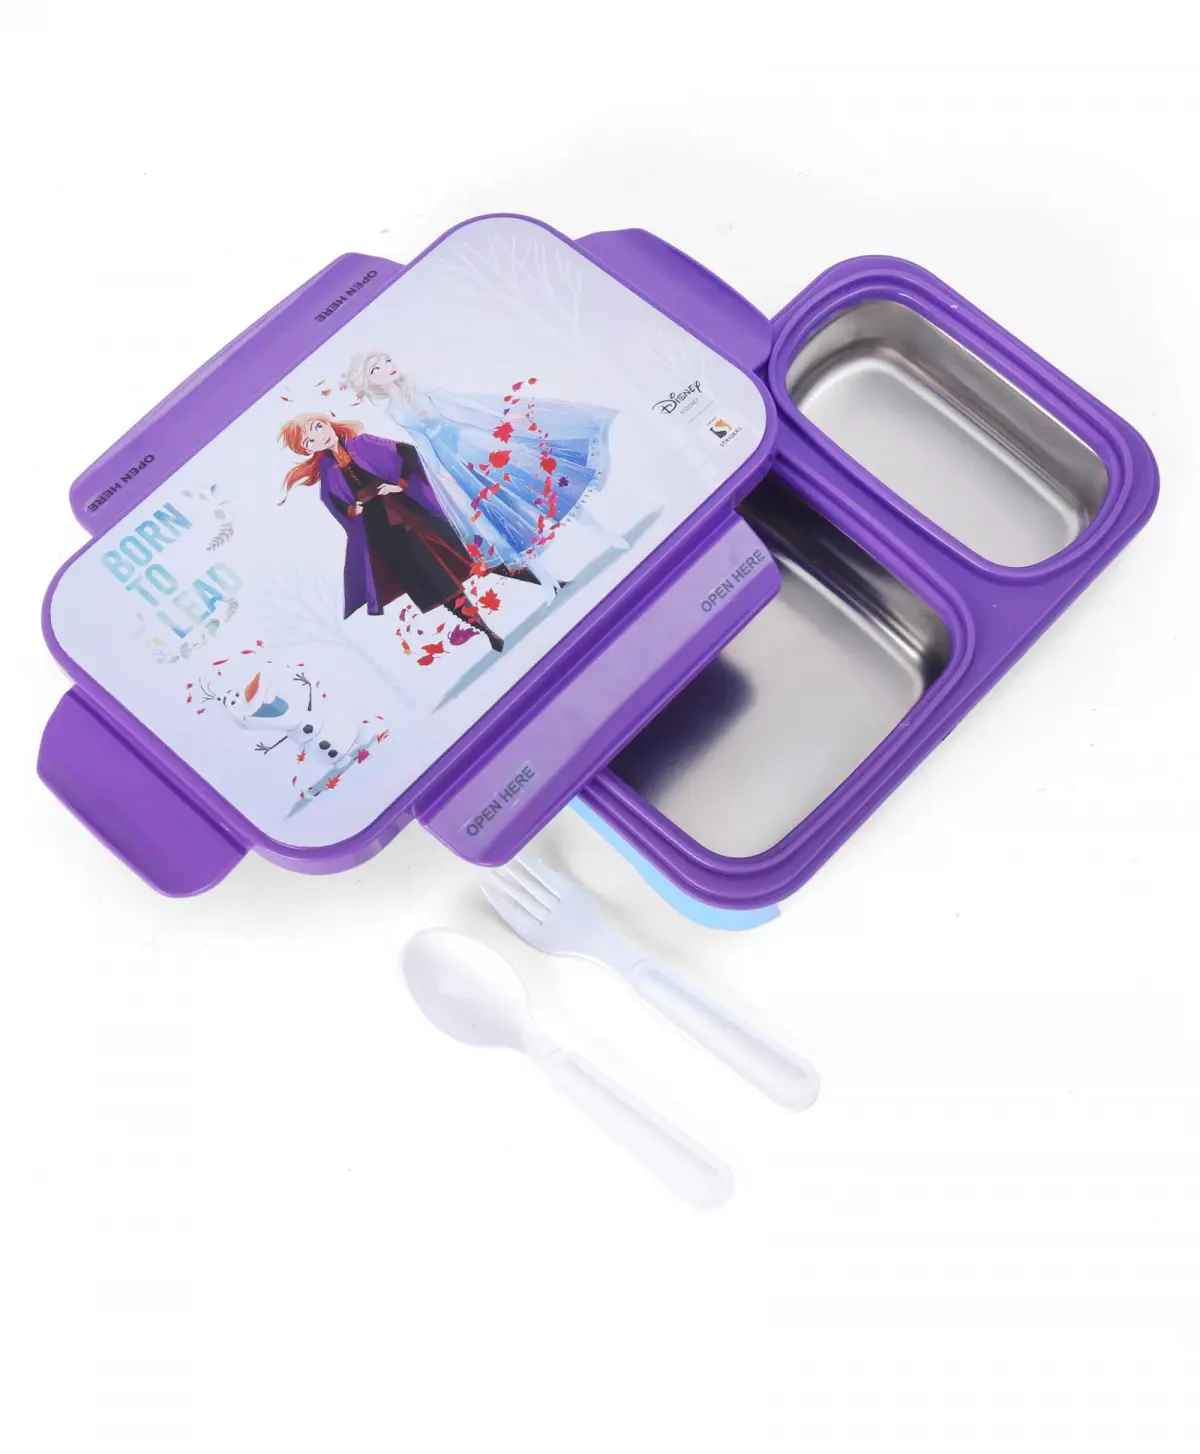 Striders Premium Stainless Steel Frozen Lunch Box For Kids Ages 3Y+